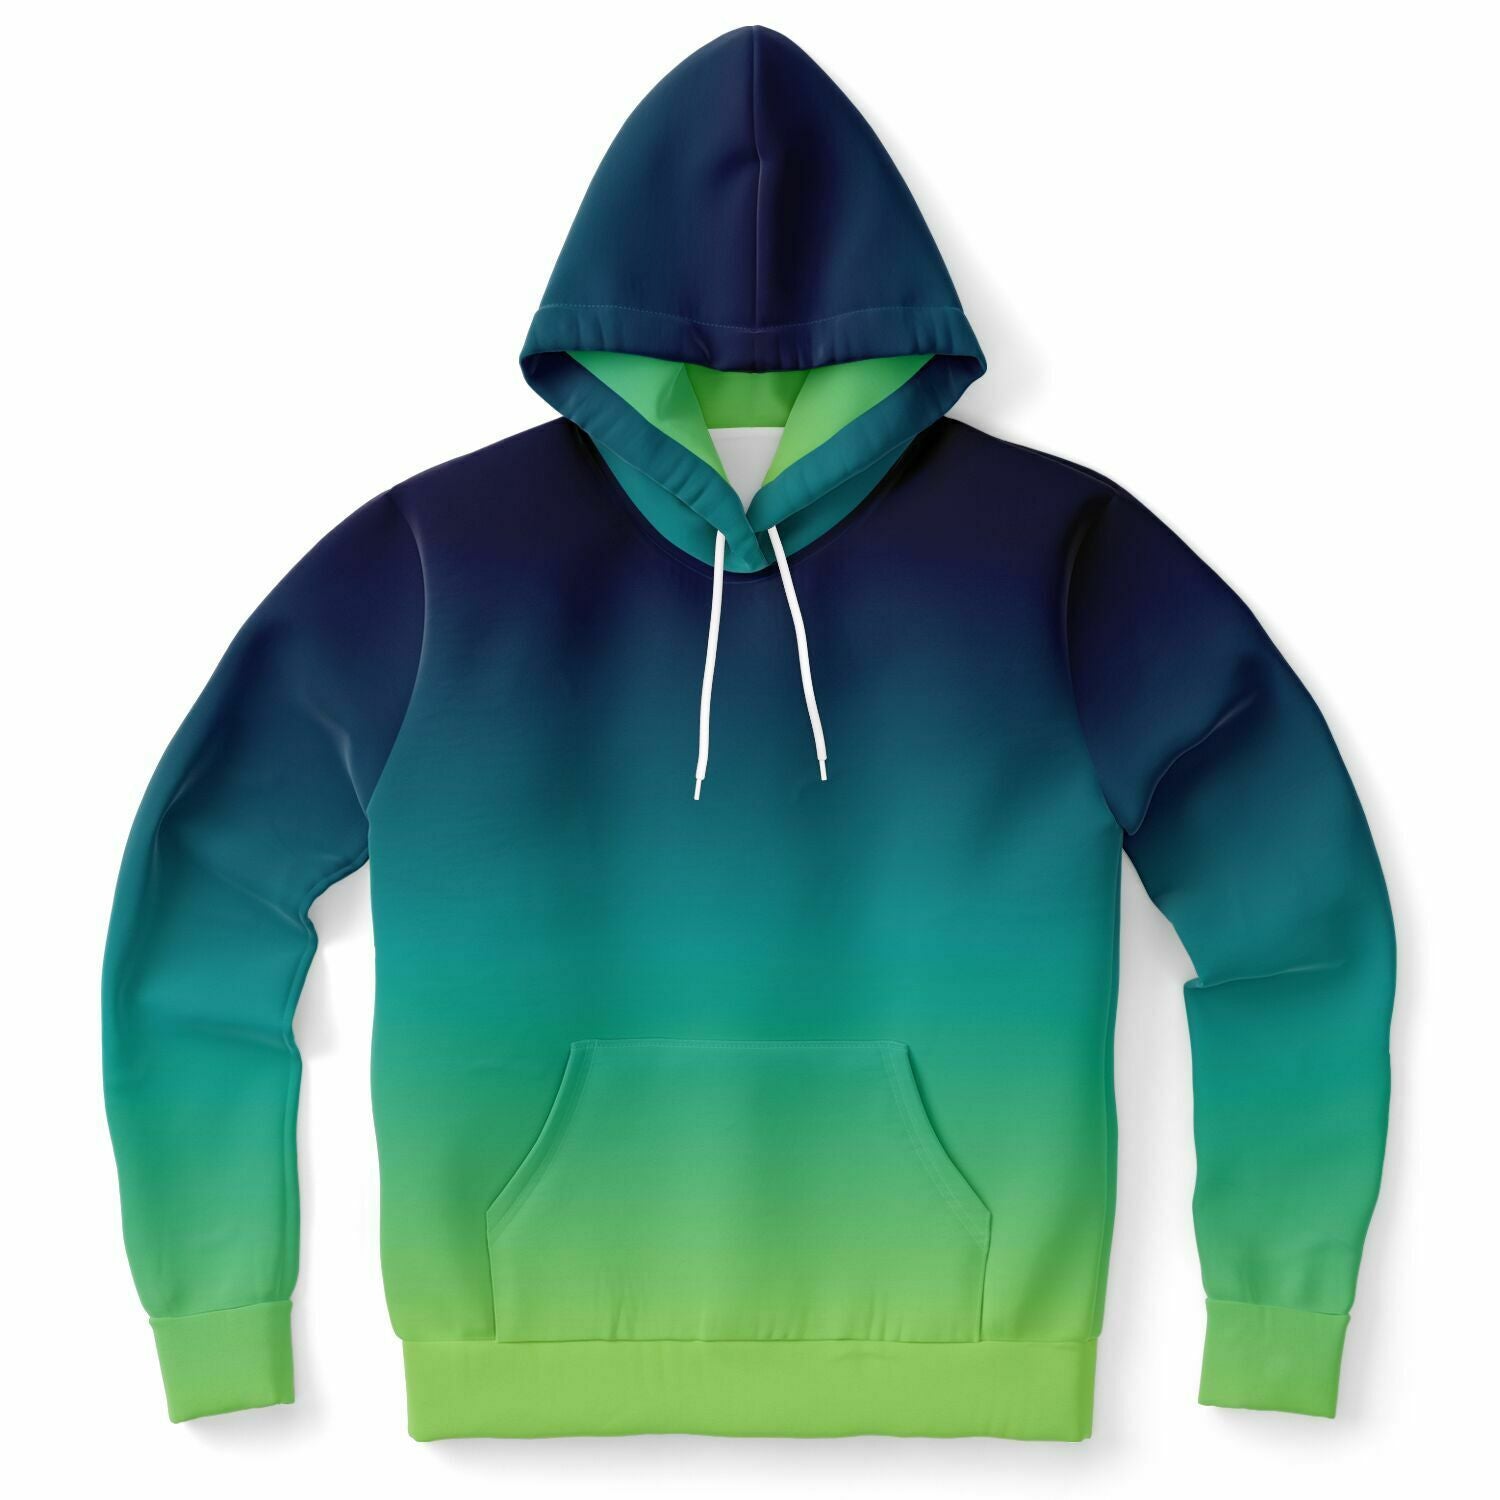 Blue and Green Ombre Hoodie, Tie Dye Gradient Pullover Men Women Adult Aesthetic Graphic Hooded Sweatshirt with Pockets L